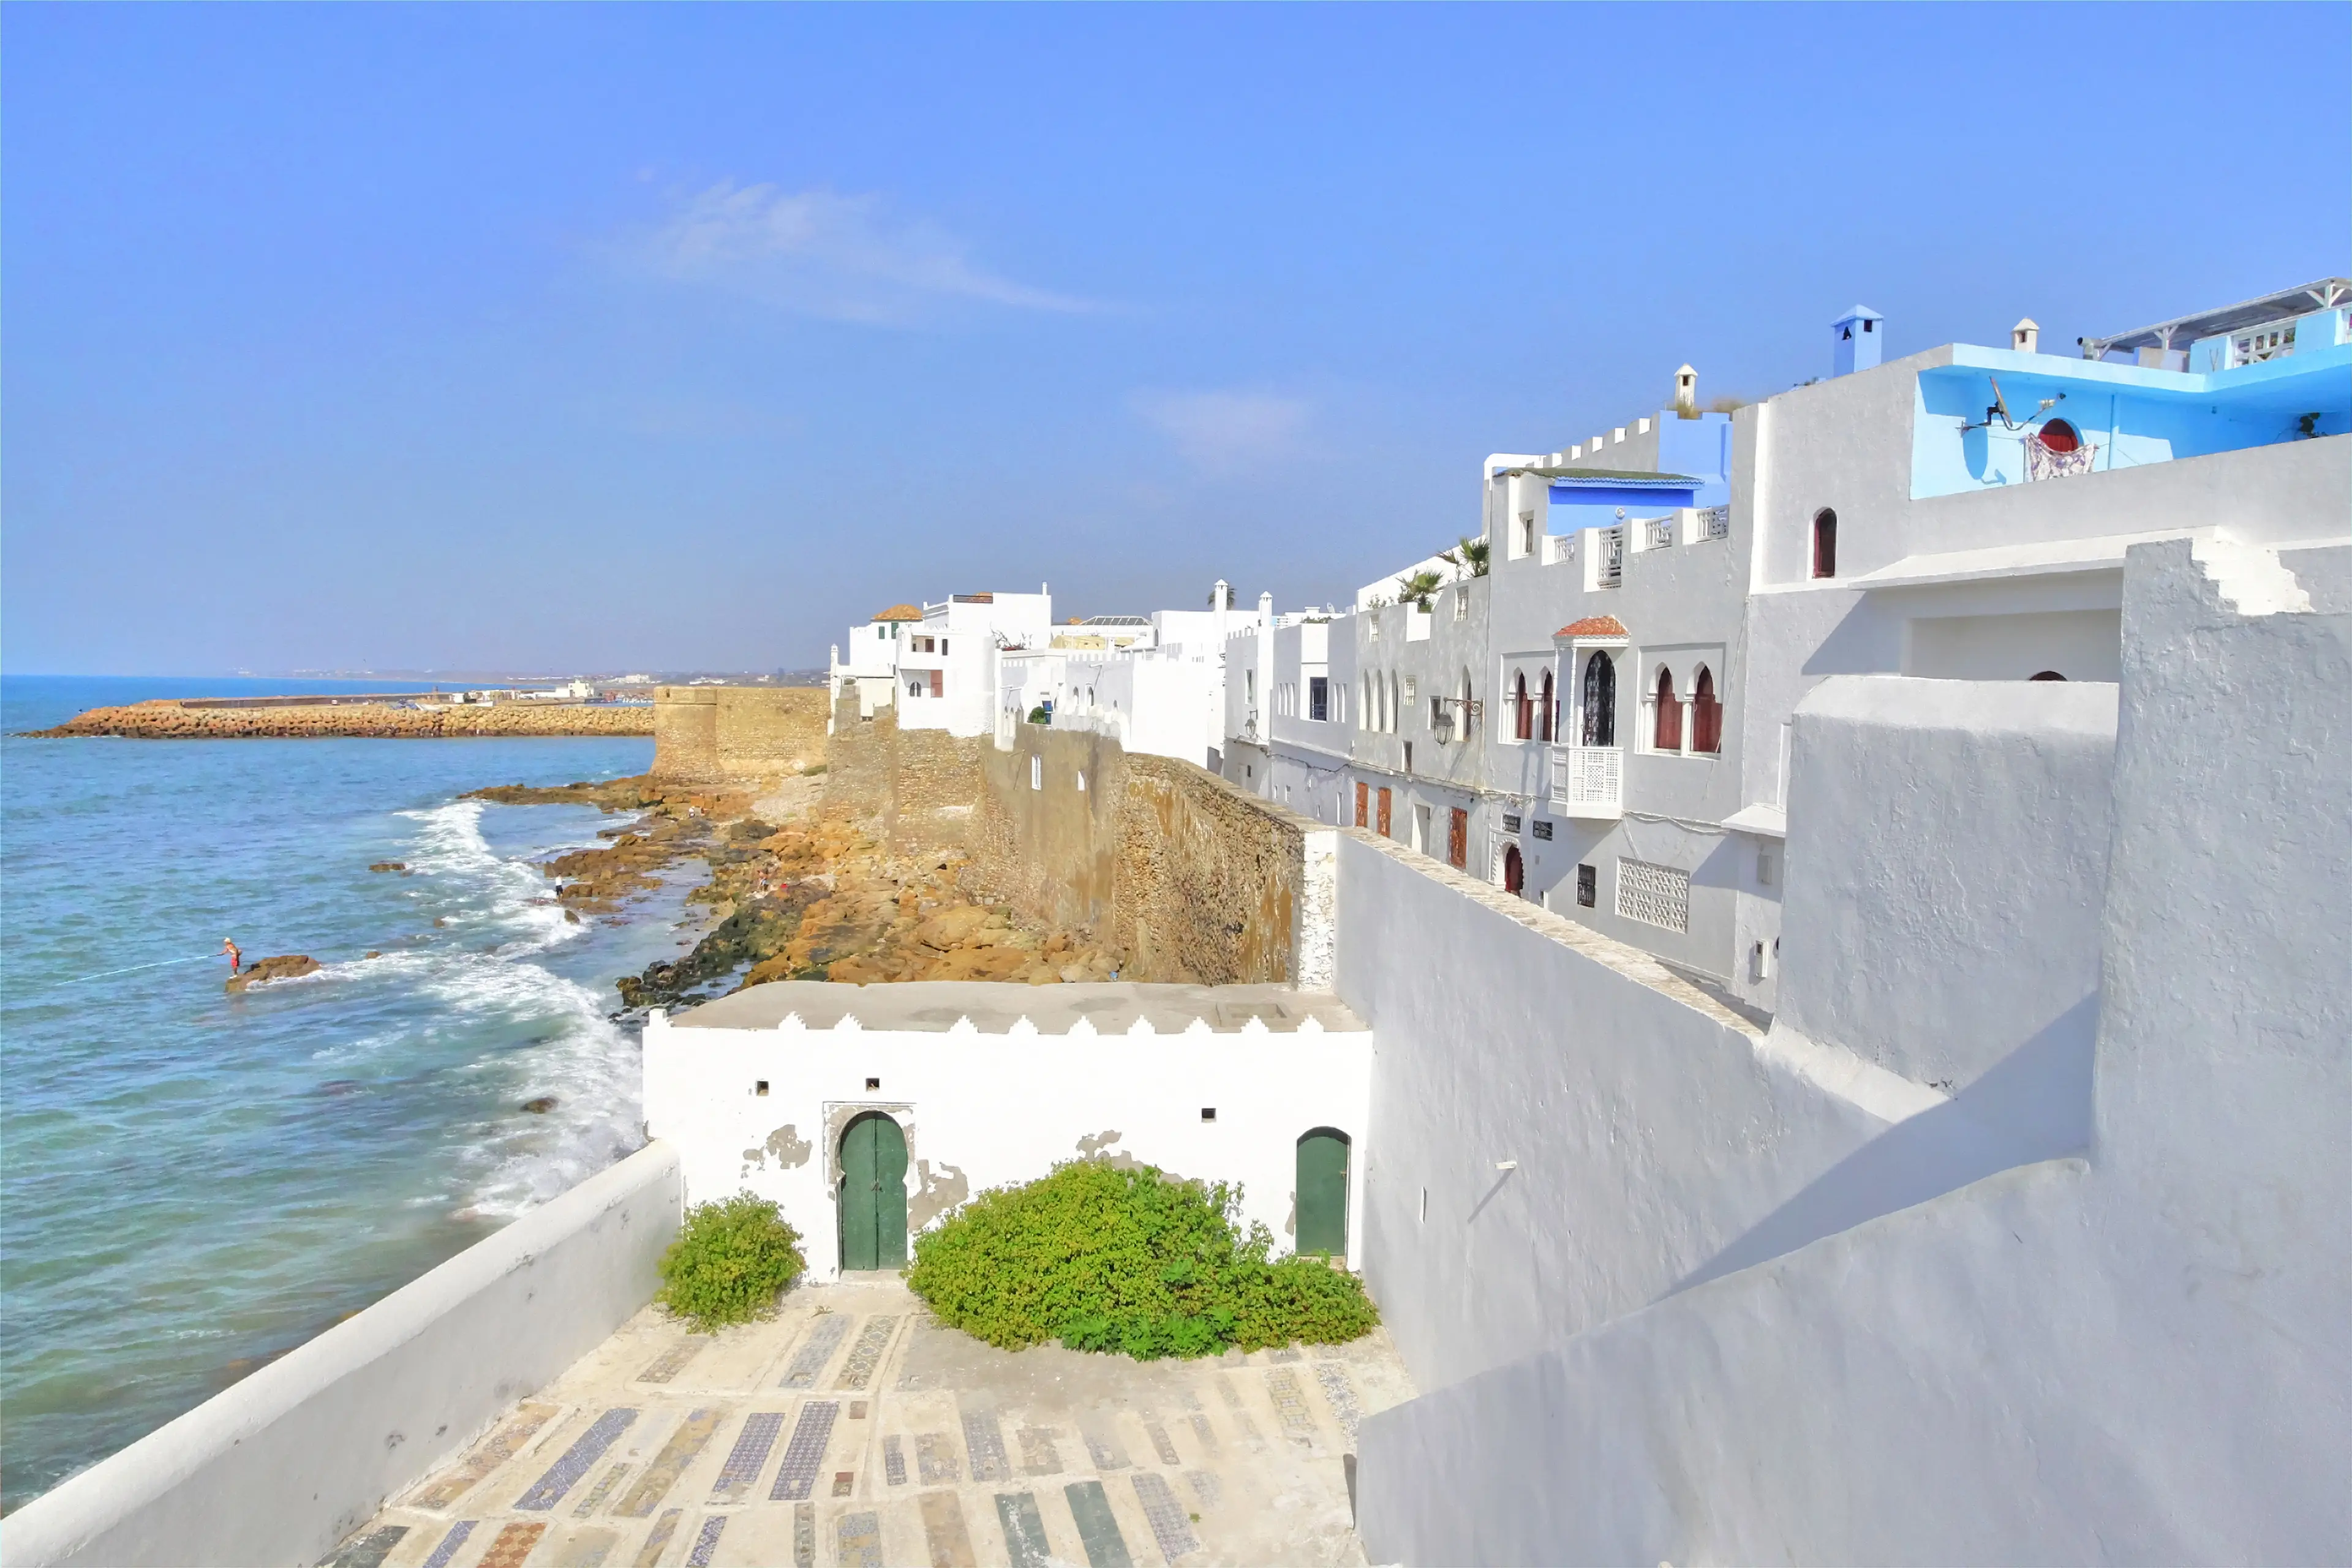 1-Day Food and Wine Adventure with Friends in Asilah, Morocco